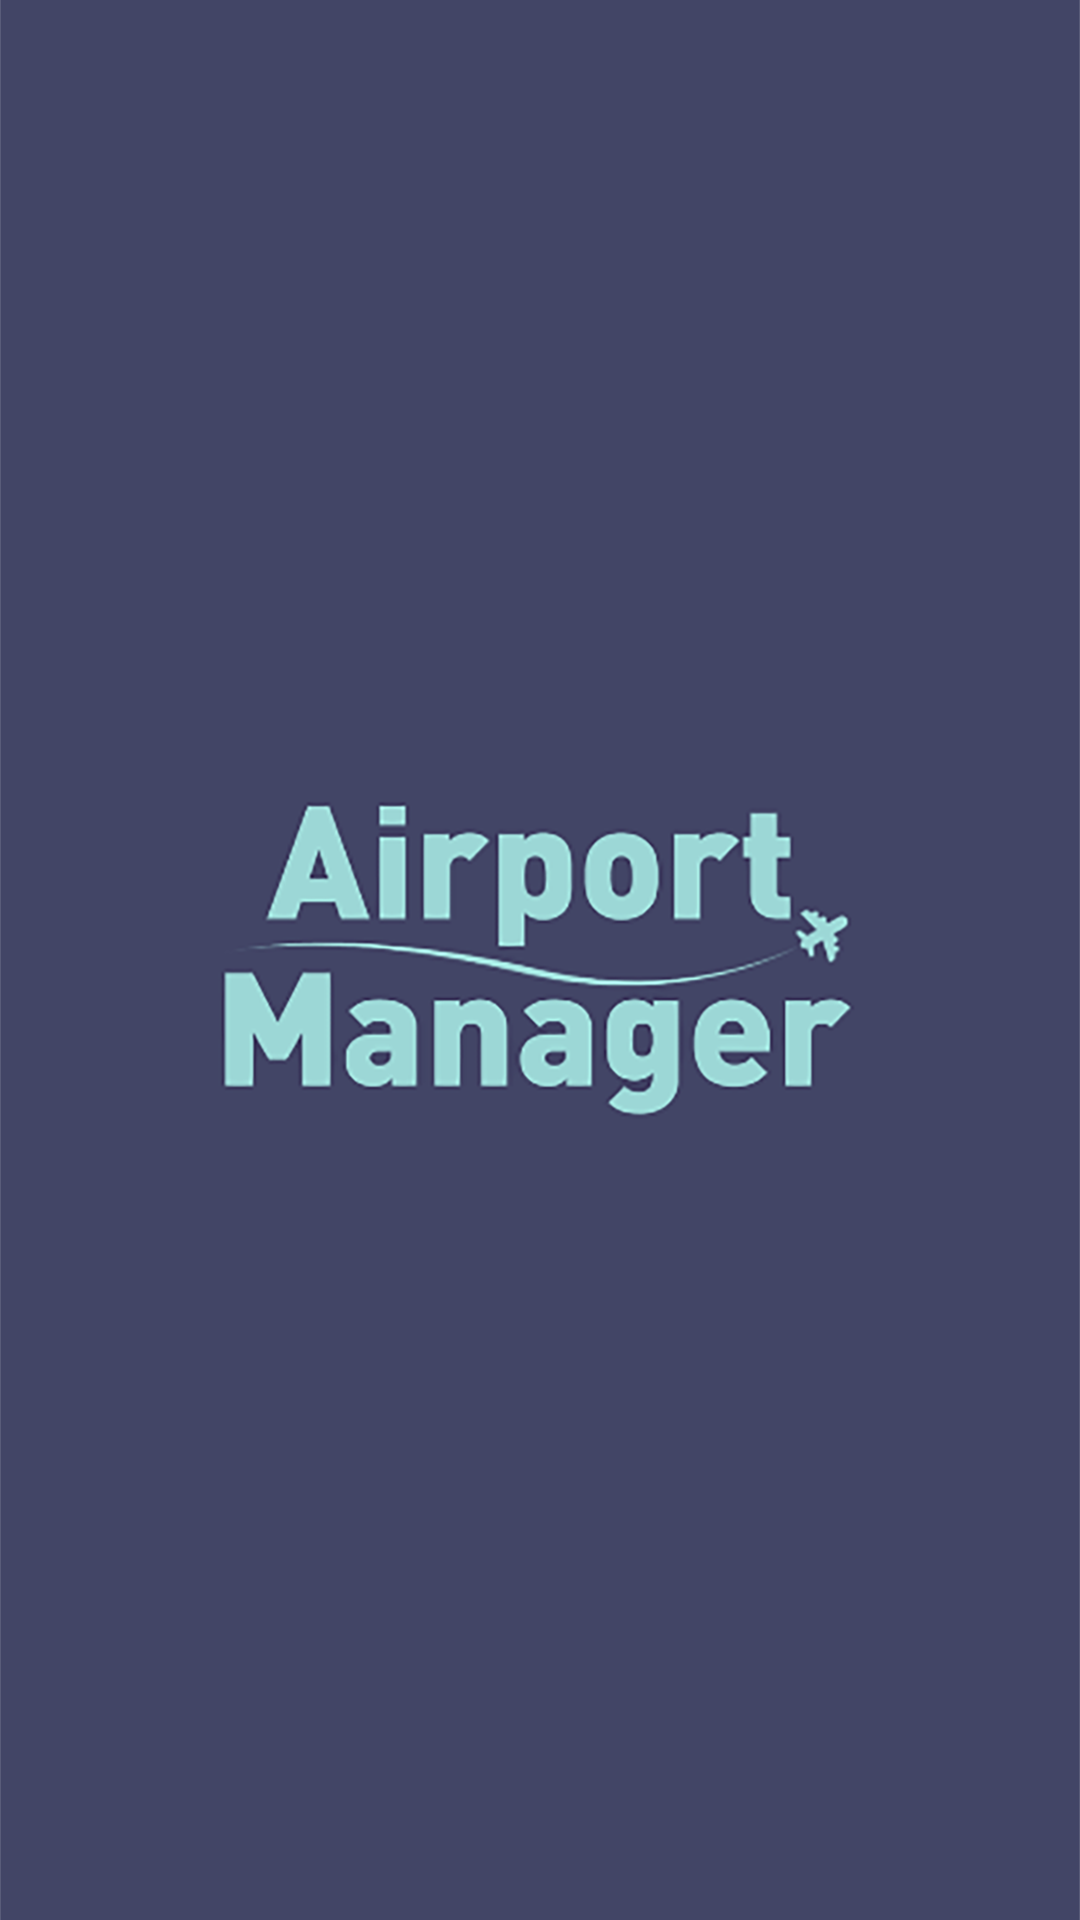 Idle Airport Managerのキャプチャ